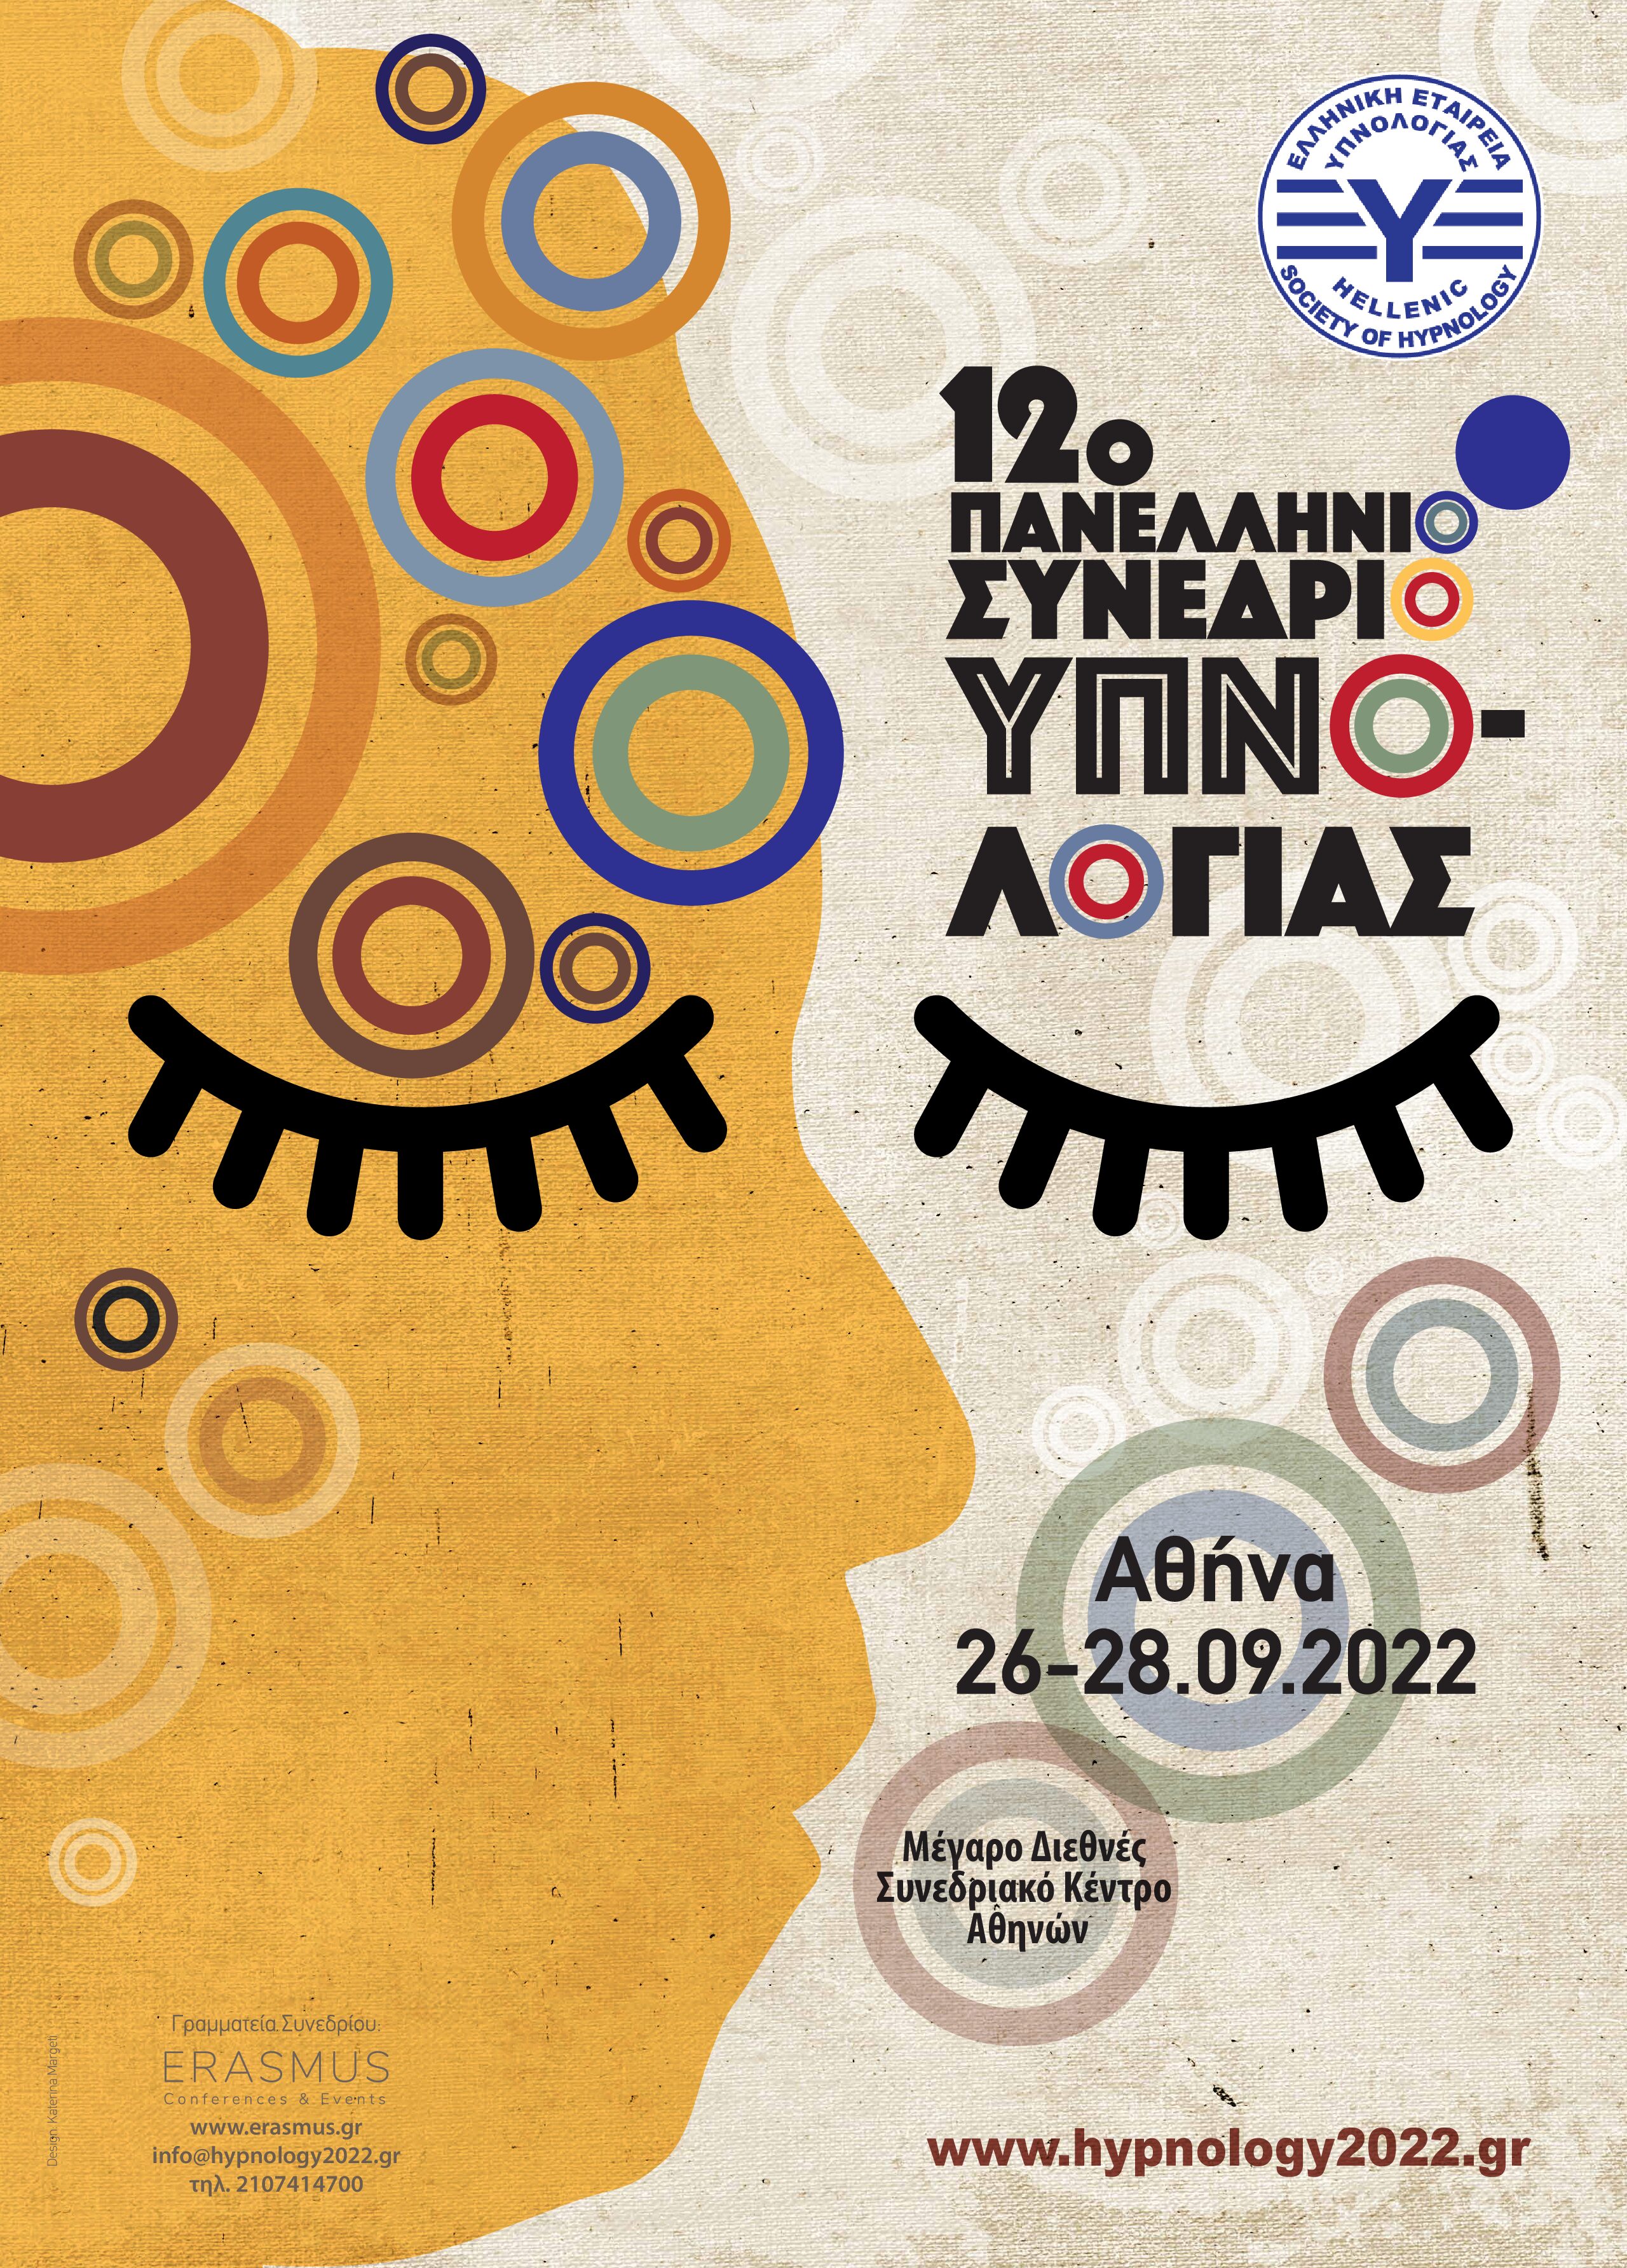 12th Hellenic Congress of Hypnology